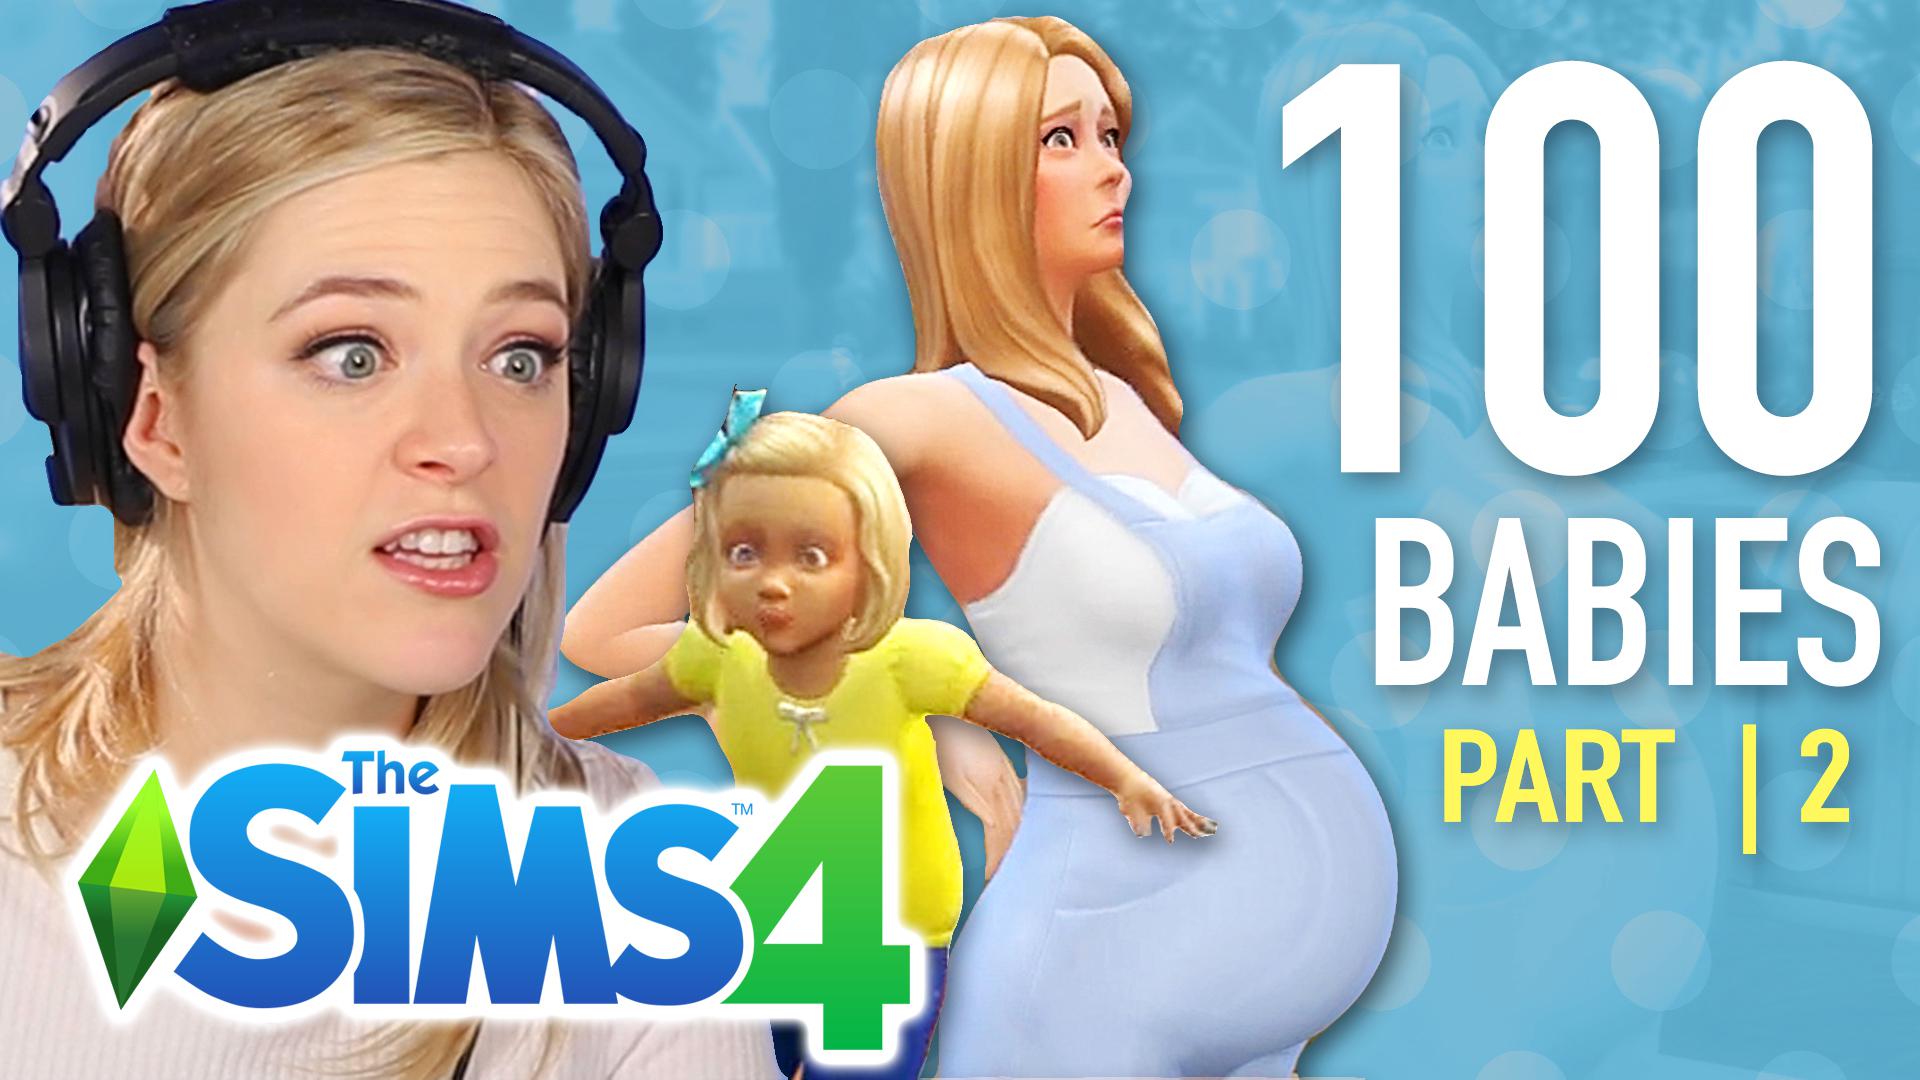 Multiplayer By Buzzfeed Single Girl Tries The 100 Baby Challenge In The Sims 4 Part 2